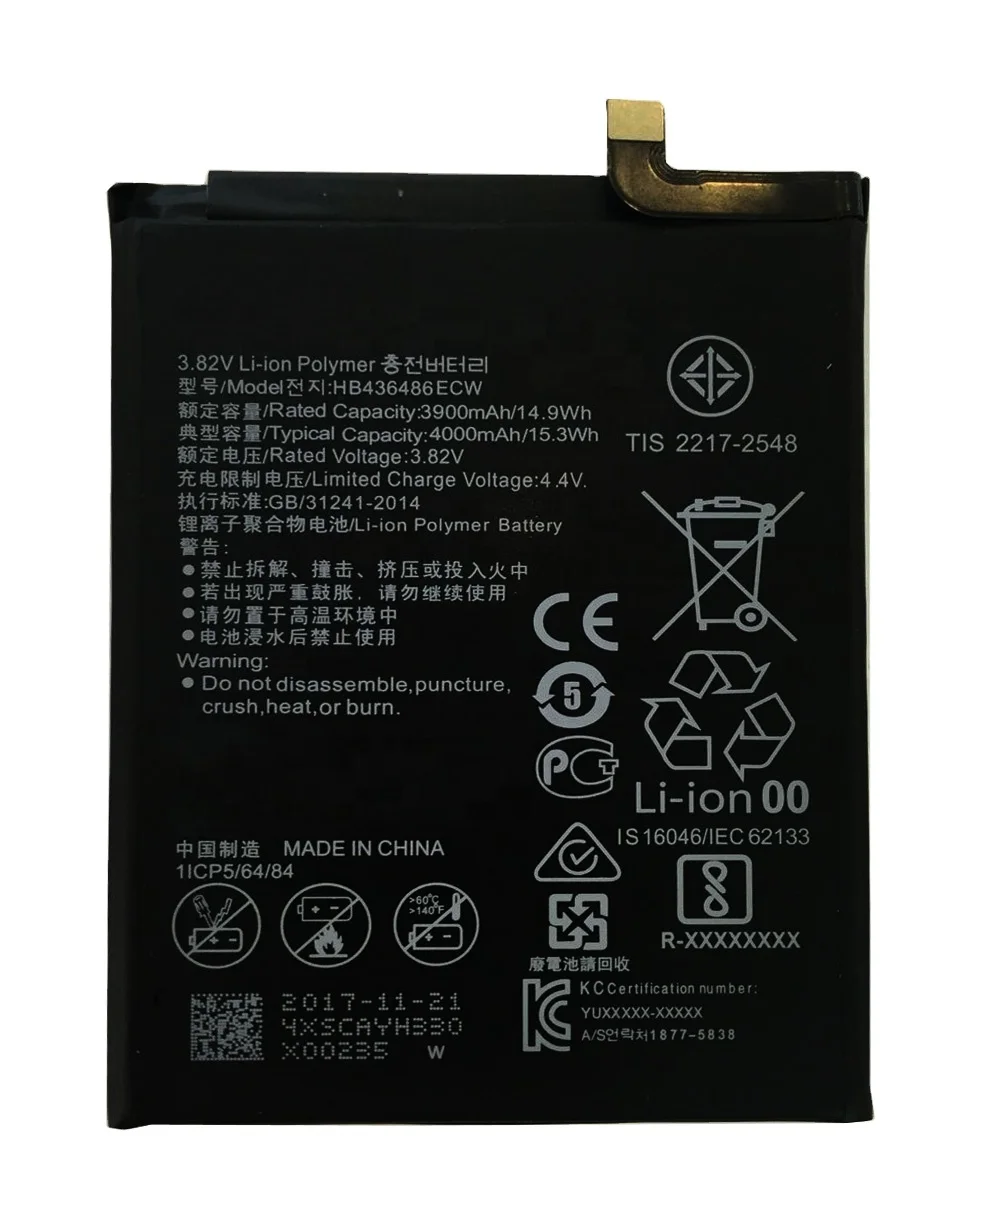 4000mah Replacement Battery Hb436486ecw For Huawei Mate10 Mate 10 Pro P20 Pro - Buy Battery Hb436486ecw,Battery For Huawei Mate 10,Battery For P20 Pro Product on Alibaba.com